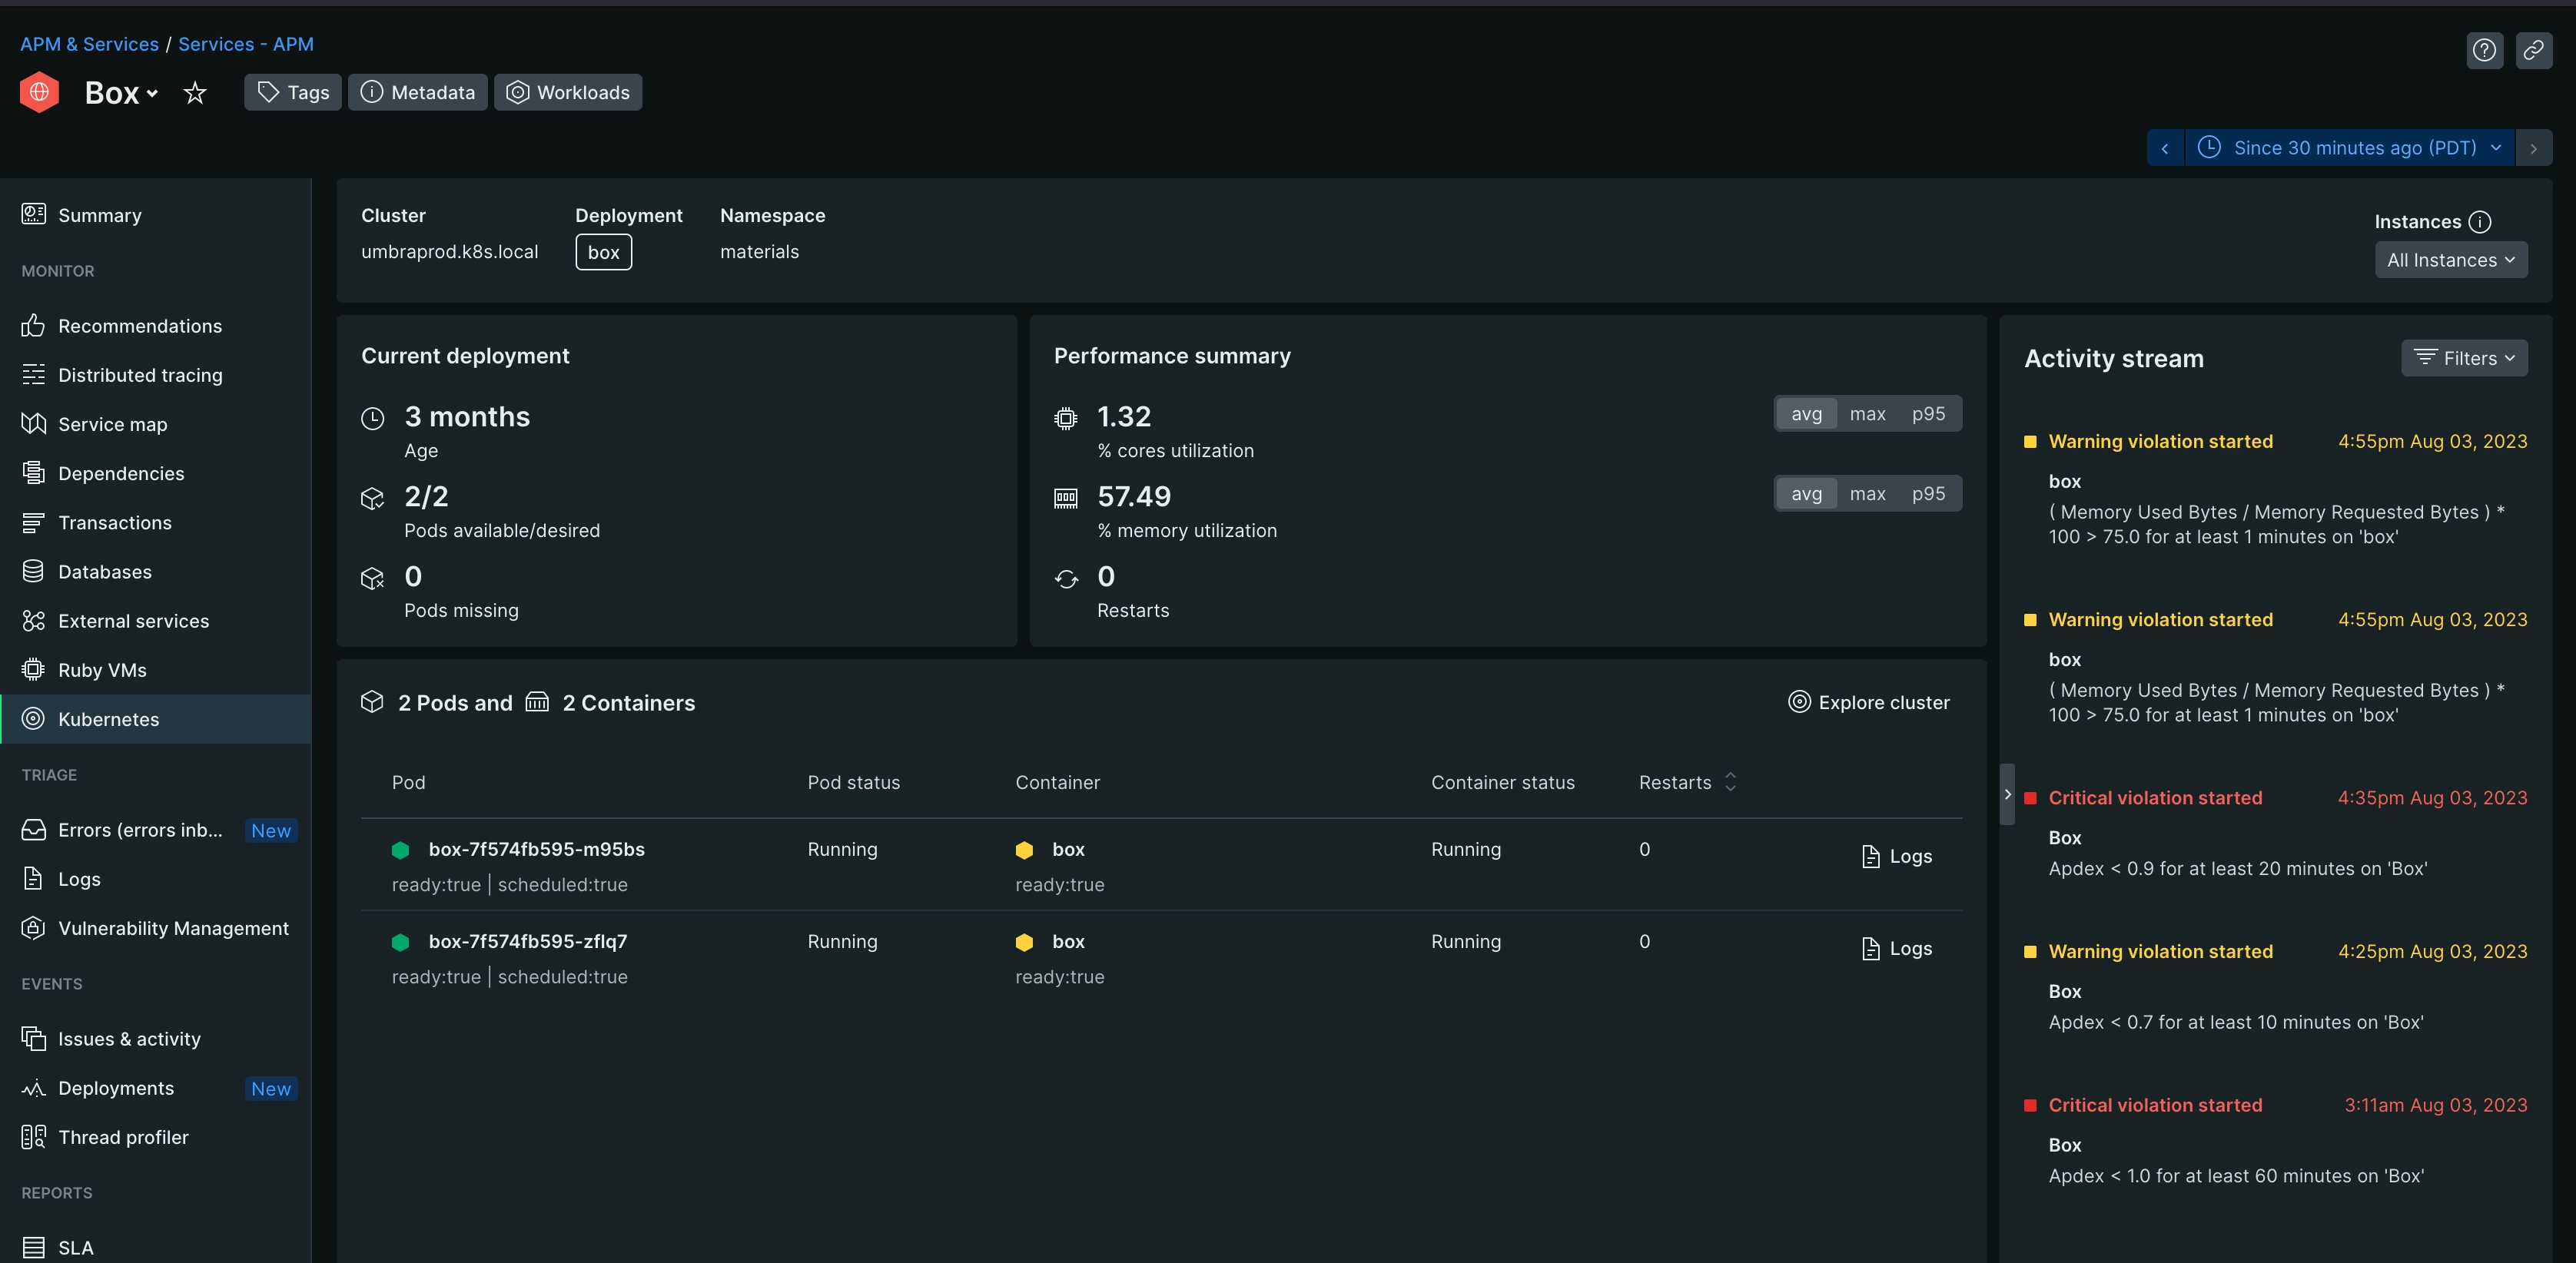 The main overview dashboard for an APM service in a Kubernetes cluster